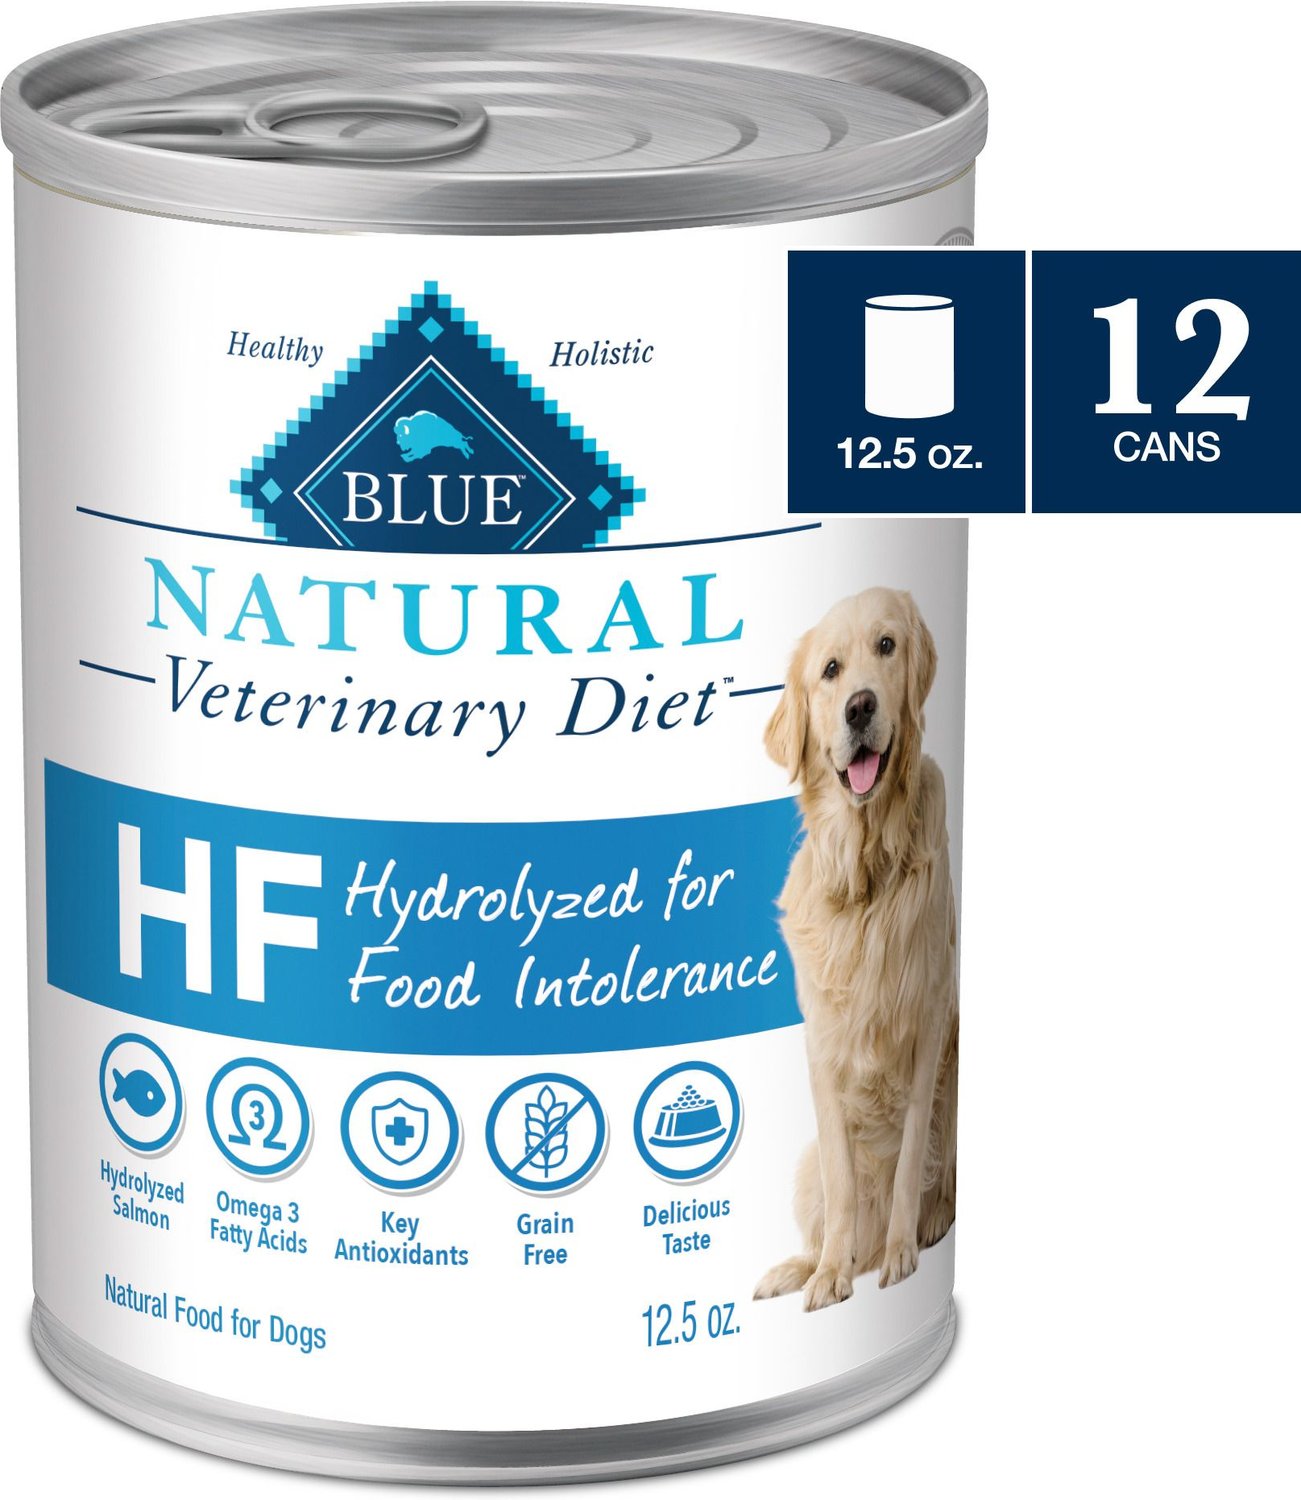 BLUE BUFFALO NATURAL VETERINARY DIET HF Hydrolyzed for